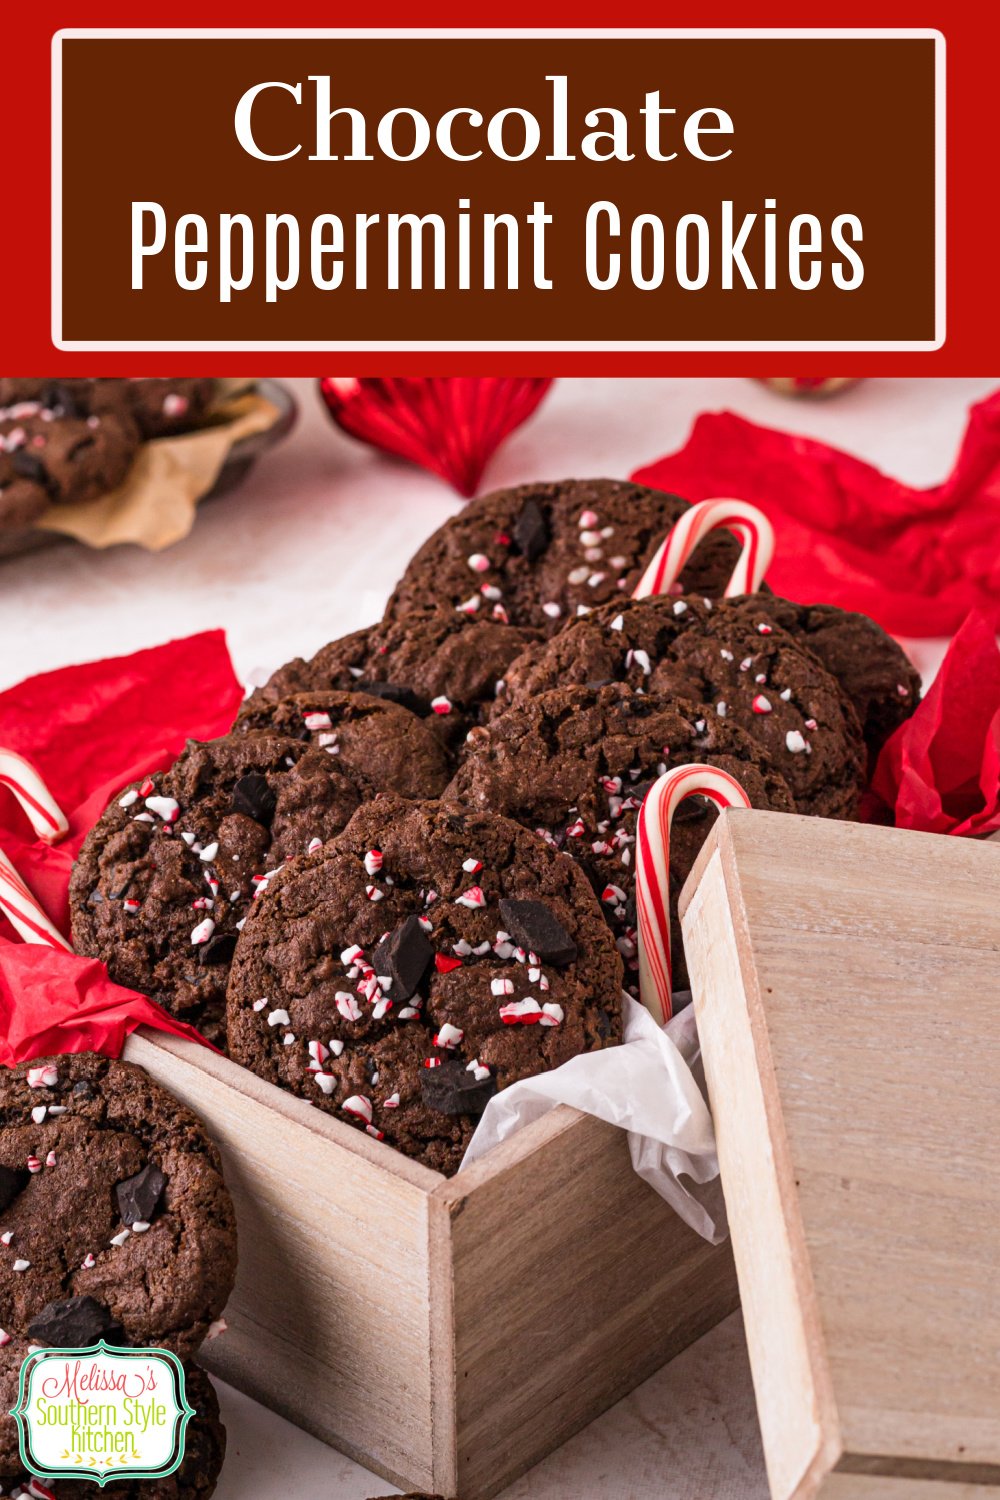 Add these Chocolate Peppermint Cookies to your Christmas cookies this year! #chocolatecookies #peppermintcookies #chocolaterecipes #chocolatecookierecipes #christmascookies via @melissasssk